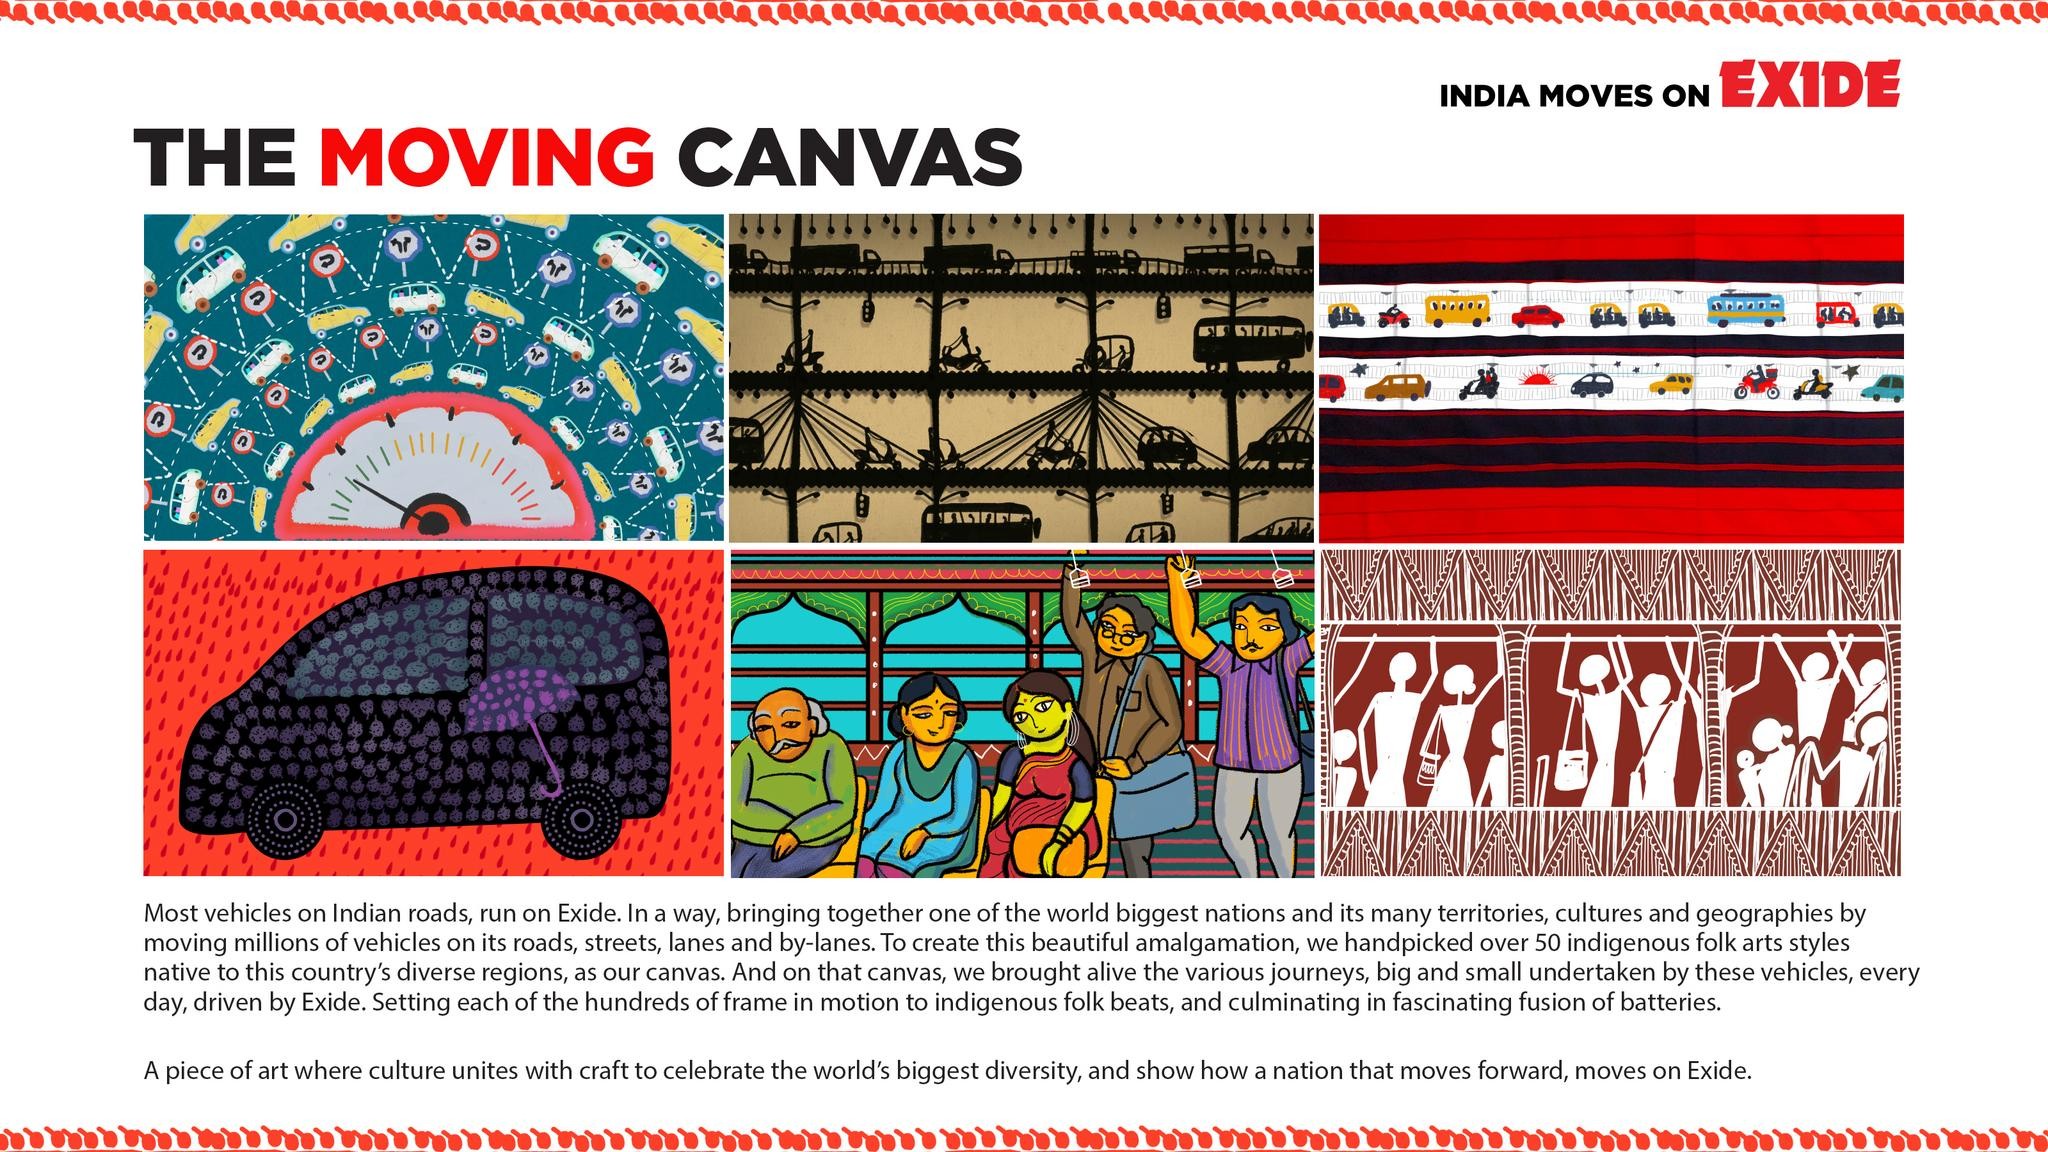 THE MOVING CANVAS